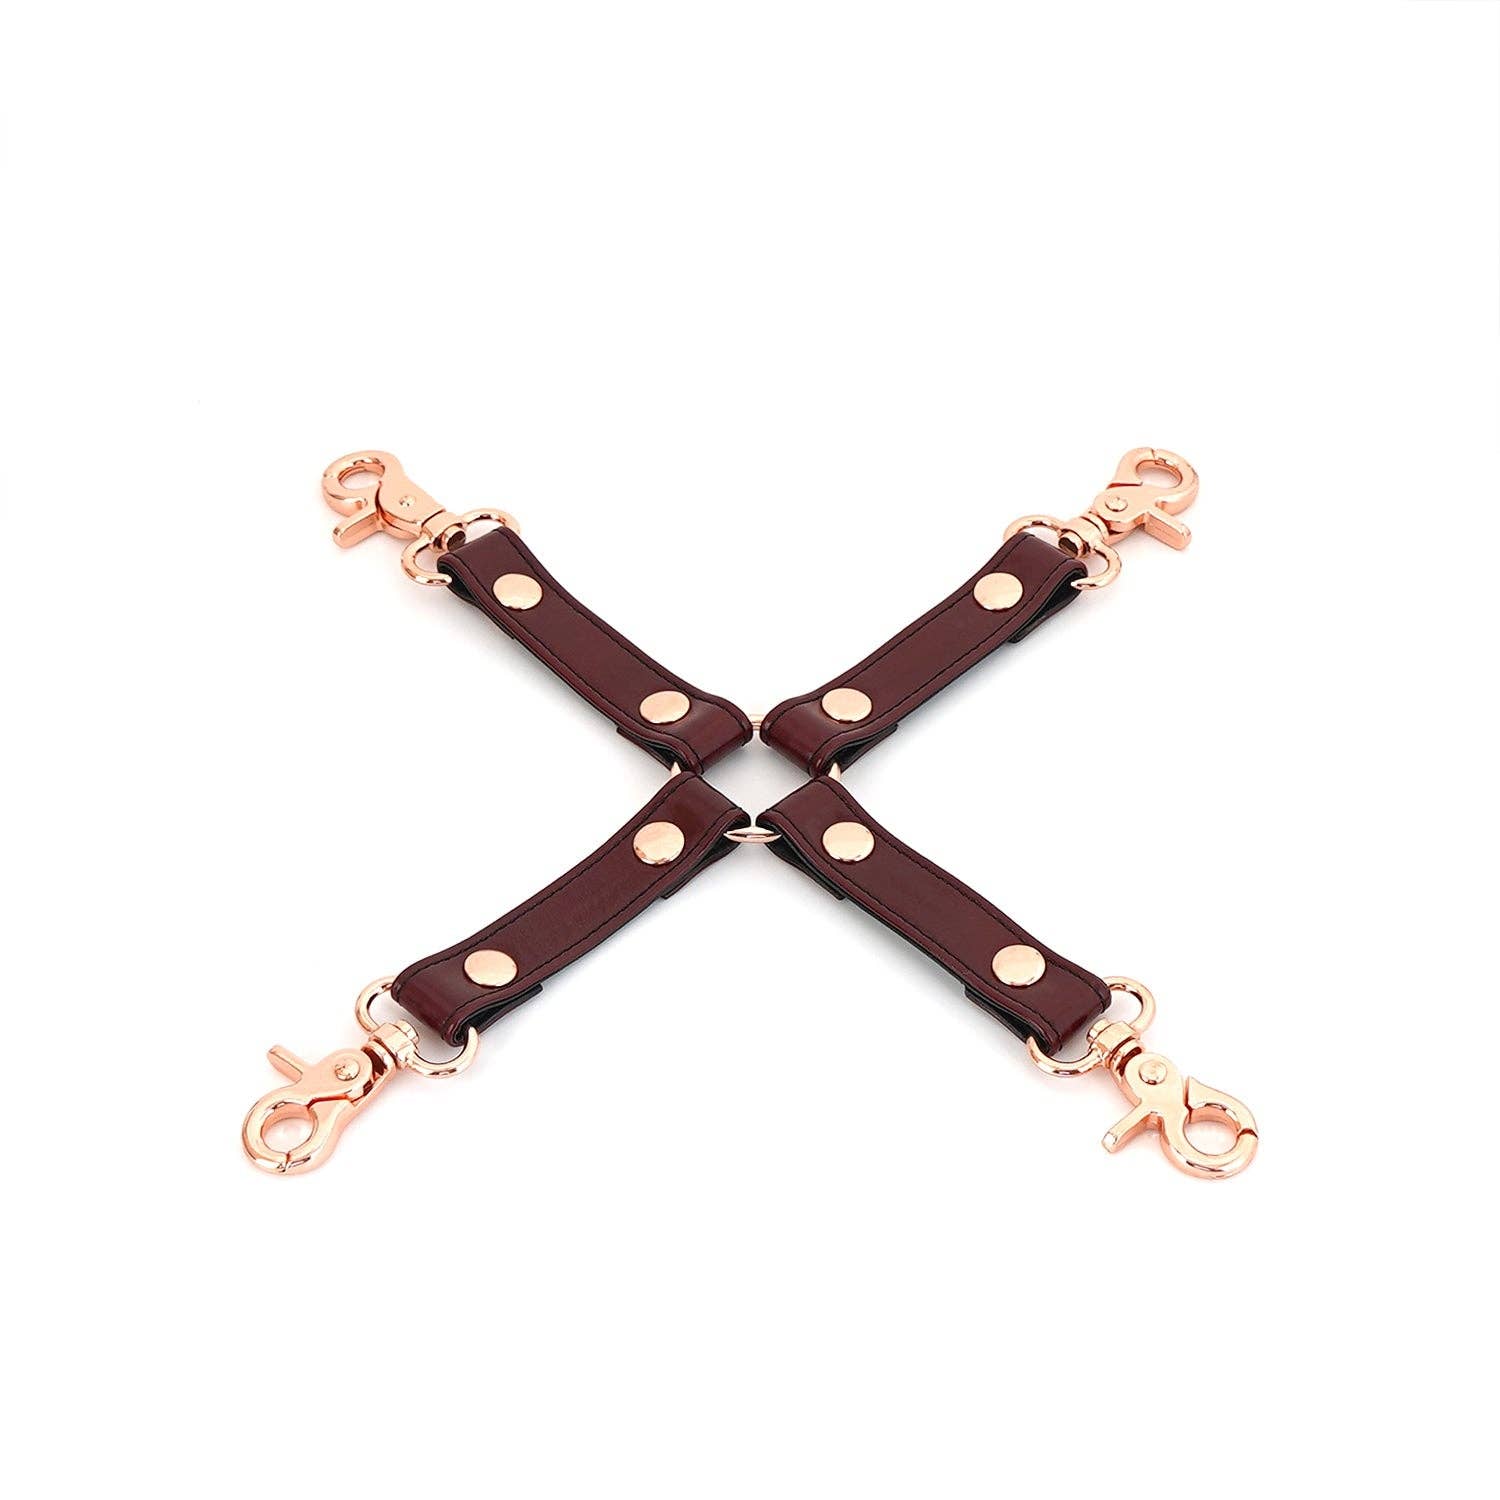 4-Way Leather Hogtie with Clips - Wine Red